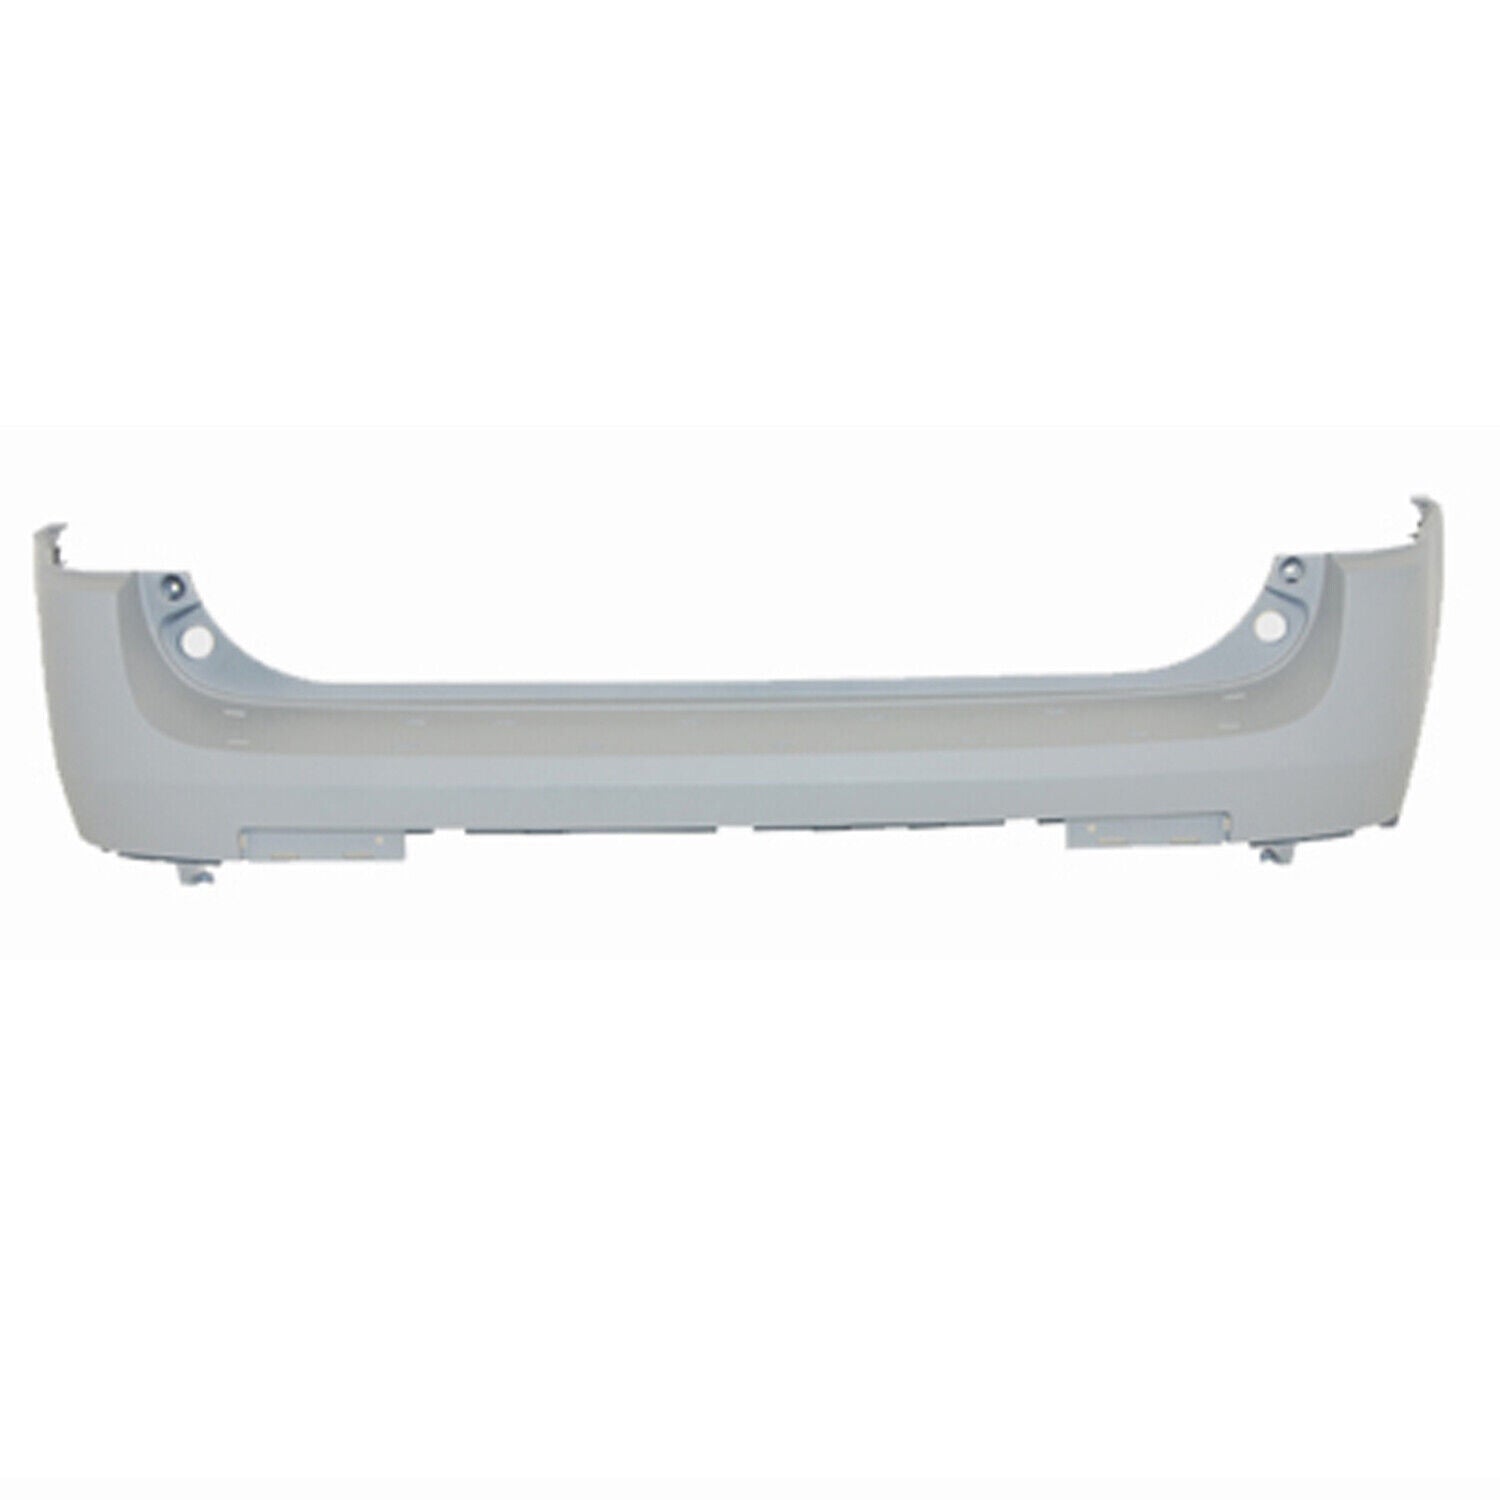 2007-2009 CHEVY EQUINOX; Rear Bumper Cover; Upper Painted to Match